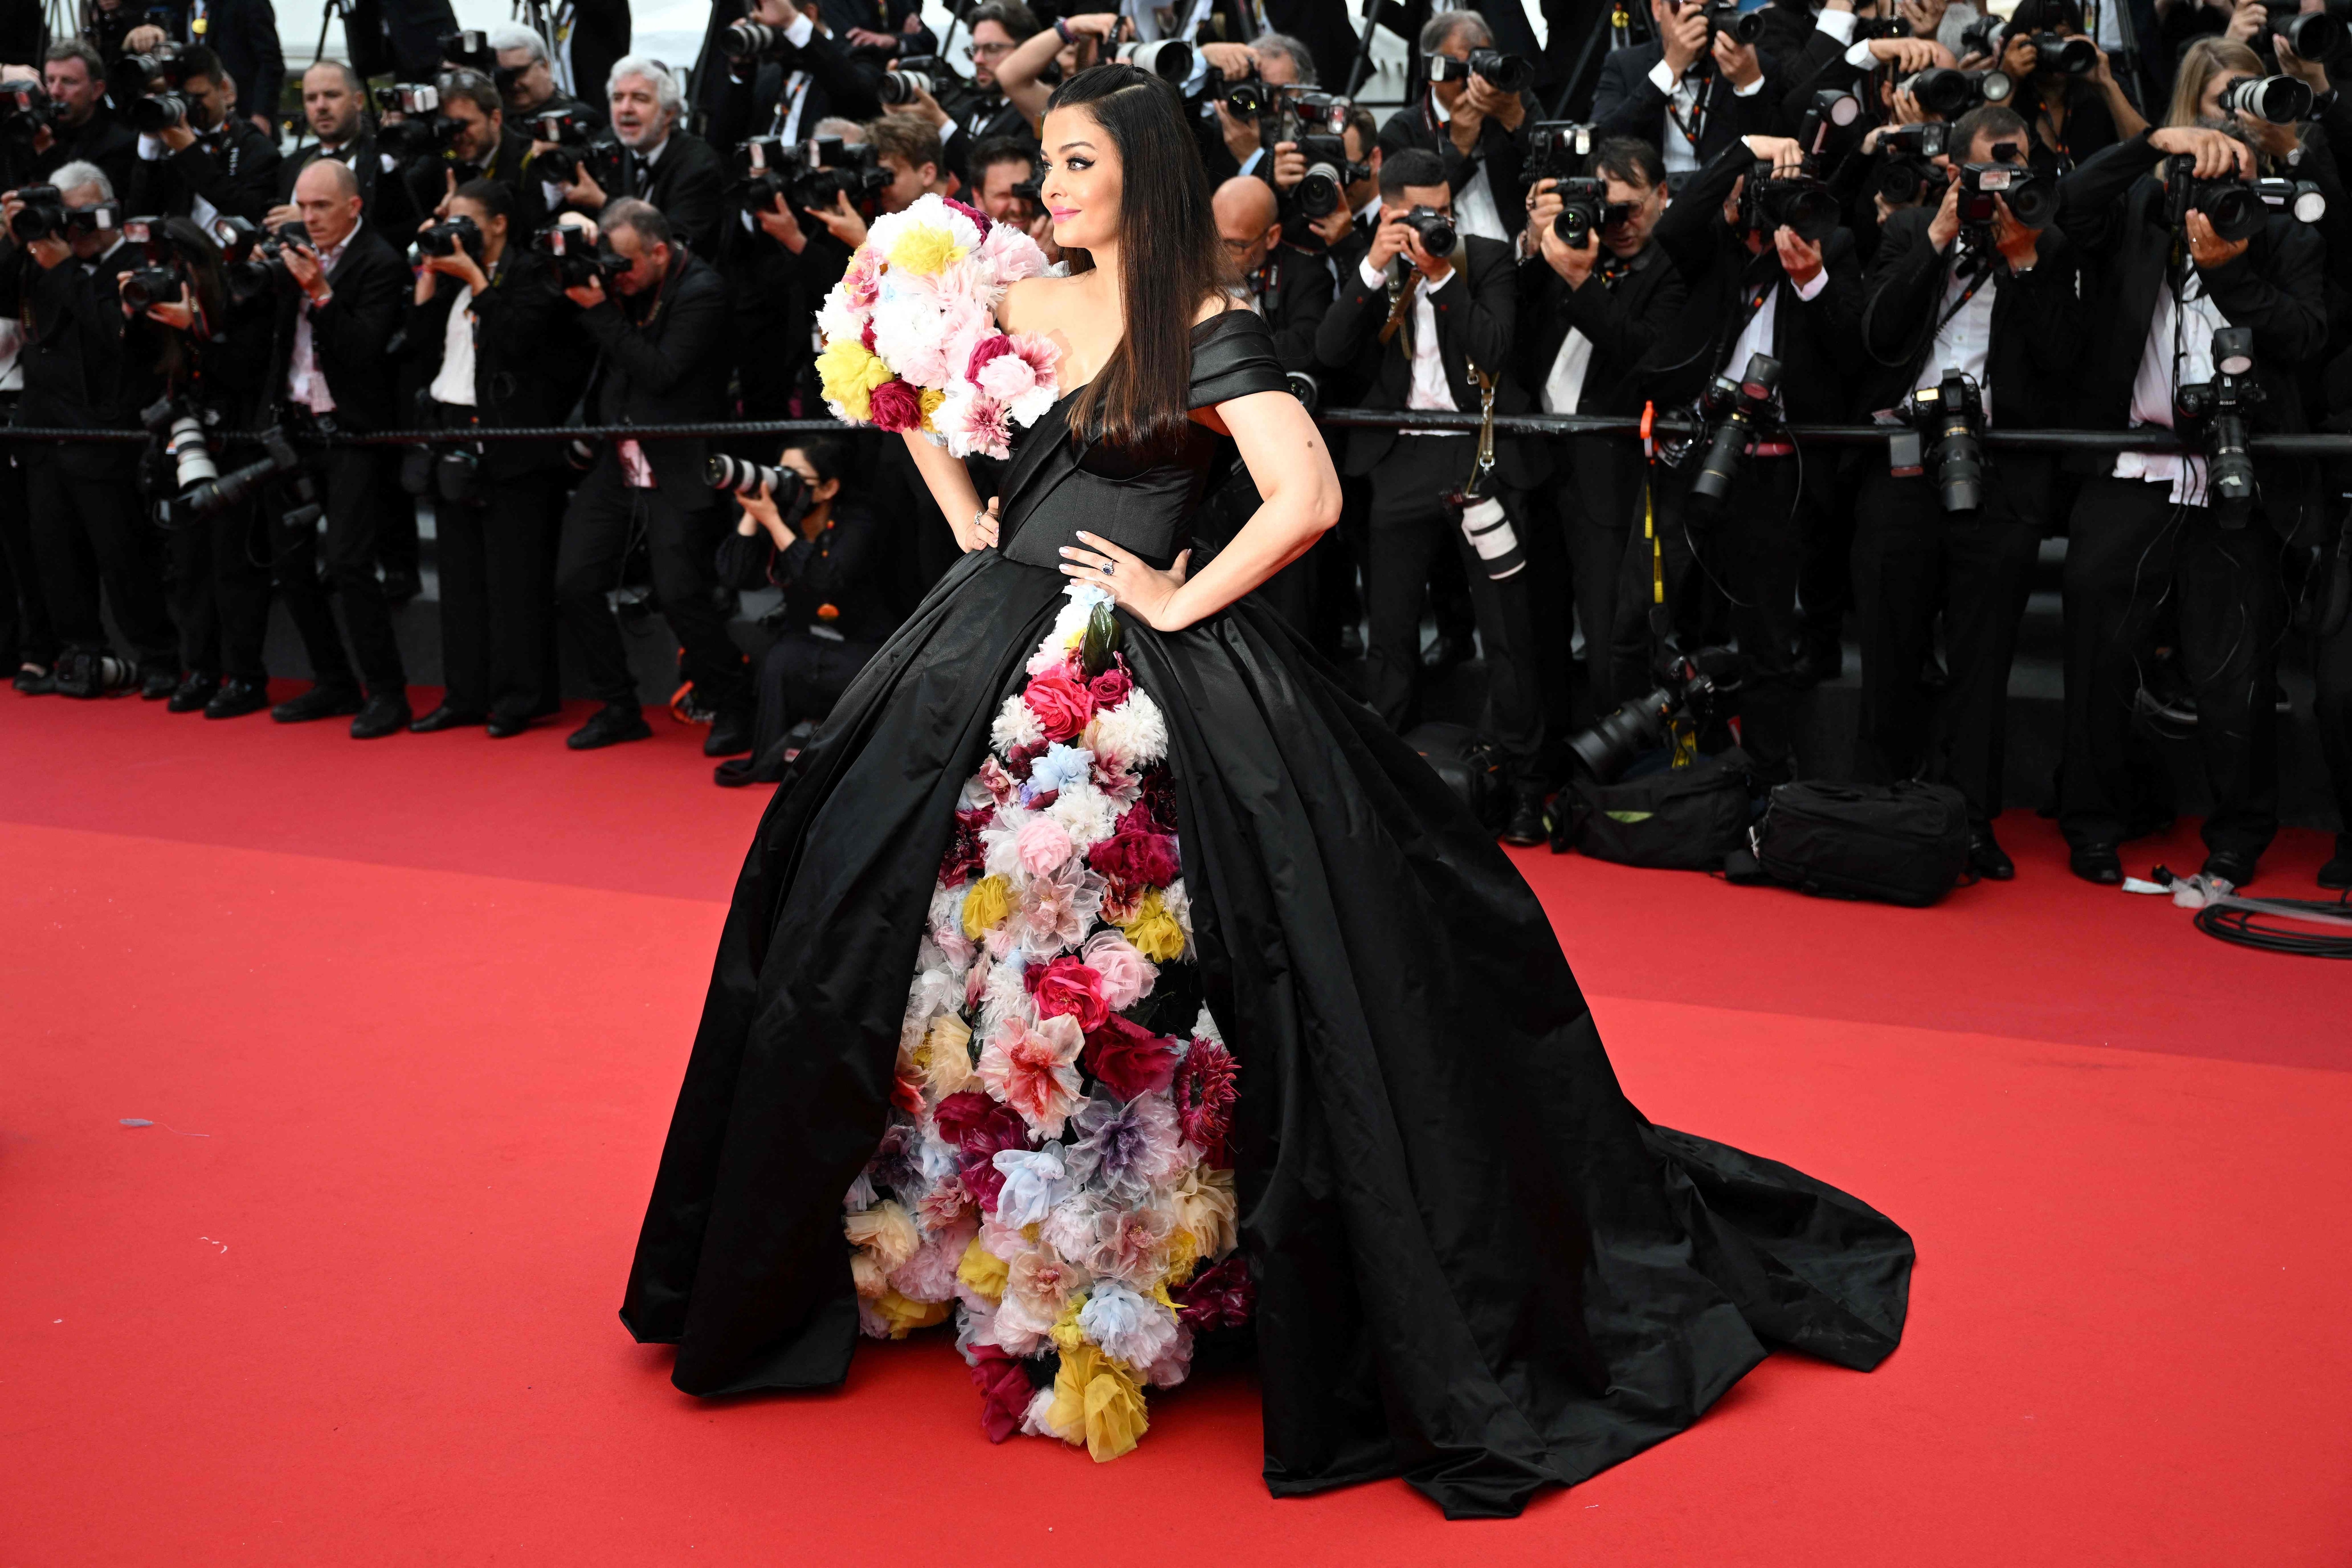 Aishwarya Rai Gets Dramatic in Couture Dress at Cannes Film